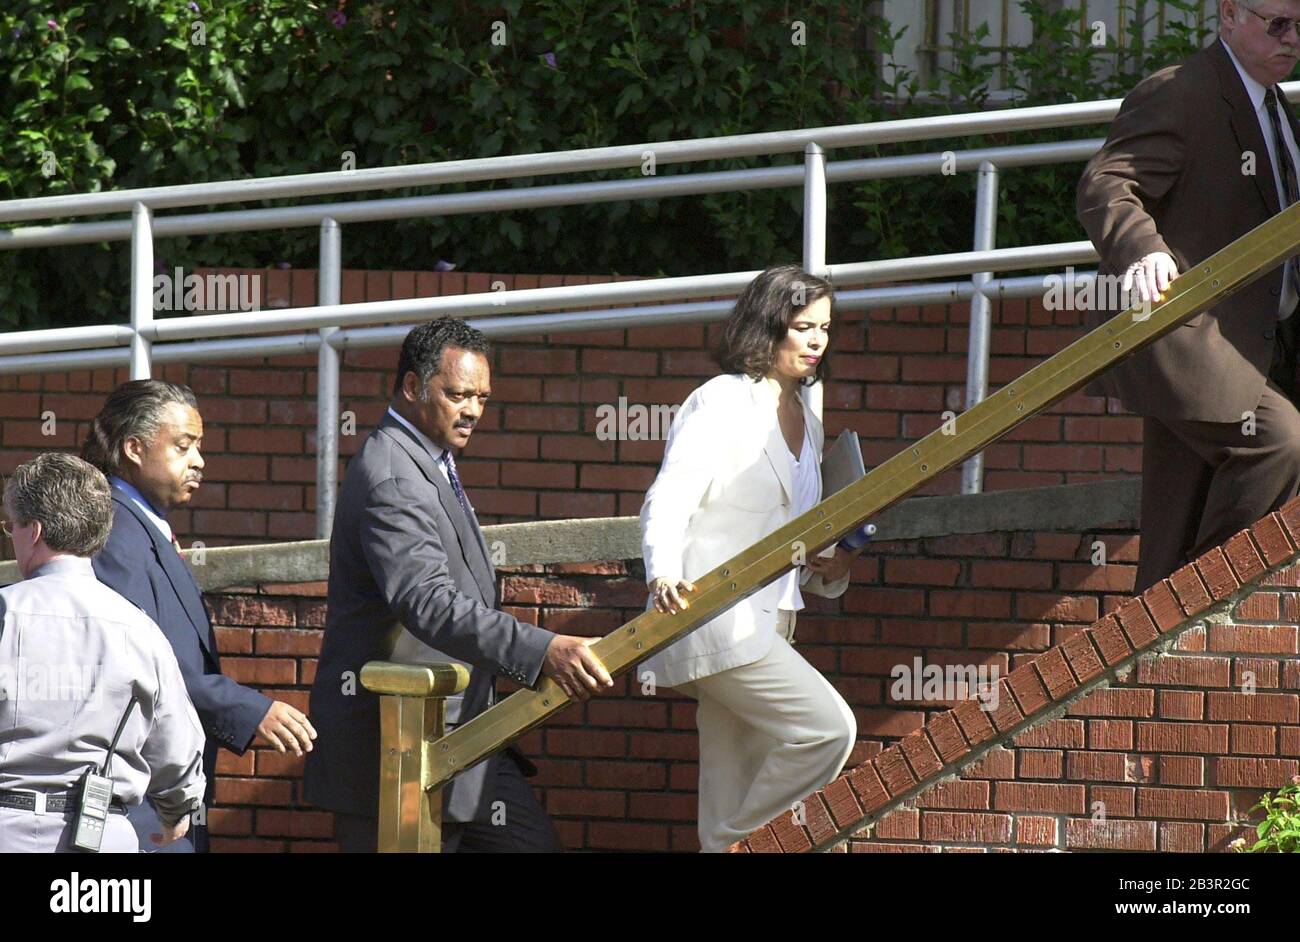 Huntsville, Texas 22JUN00 USA: Witnesses to the execution of convicted murderer Gary Graham walk towards the Walls Unit of the Texas Department of Corrections facility: (from left) Rev. Al Sharpton,  Rev. Jesse Jackson and Bianca Jagger. Demonstrators on both sides of the capital punishment debate protested outside the unit  ©Bob Daemmrich Stock Photo